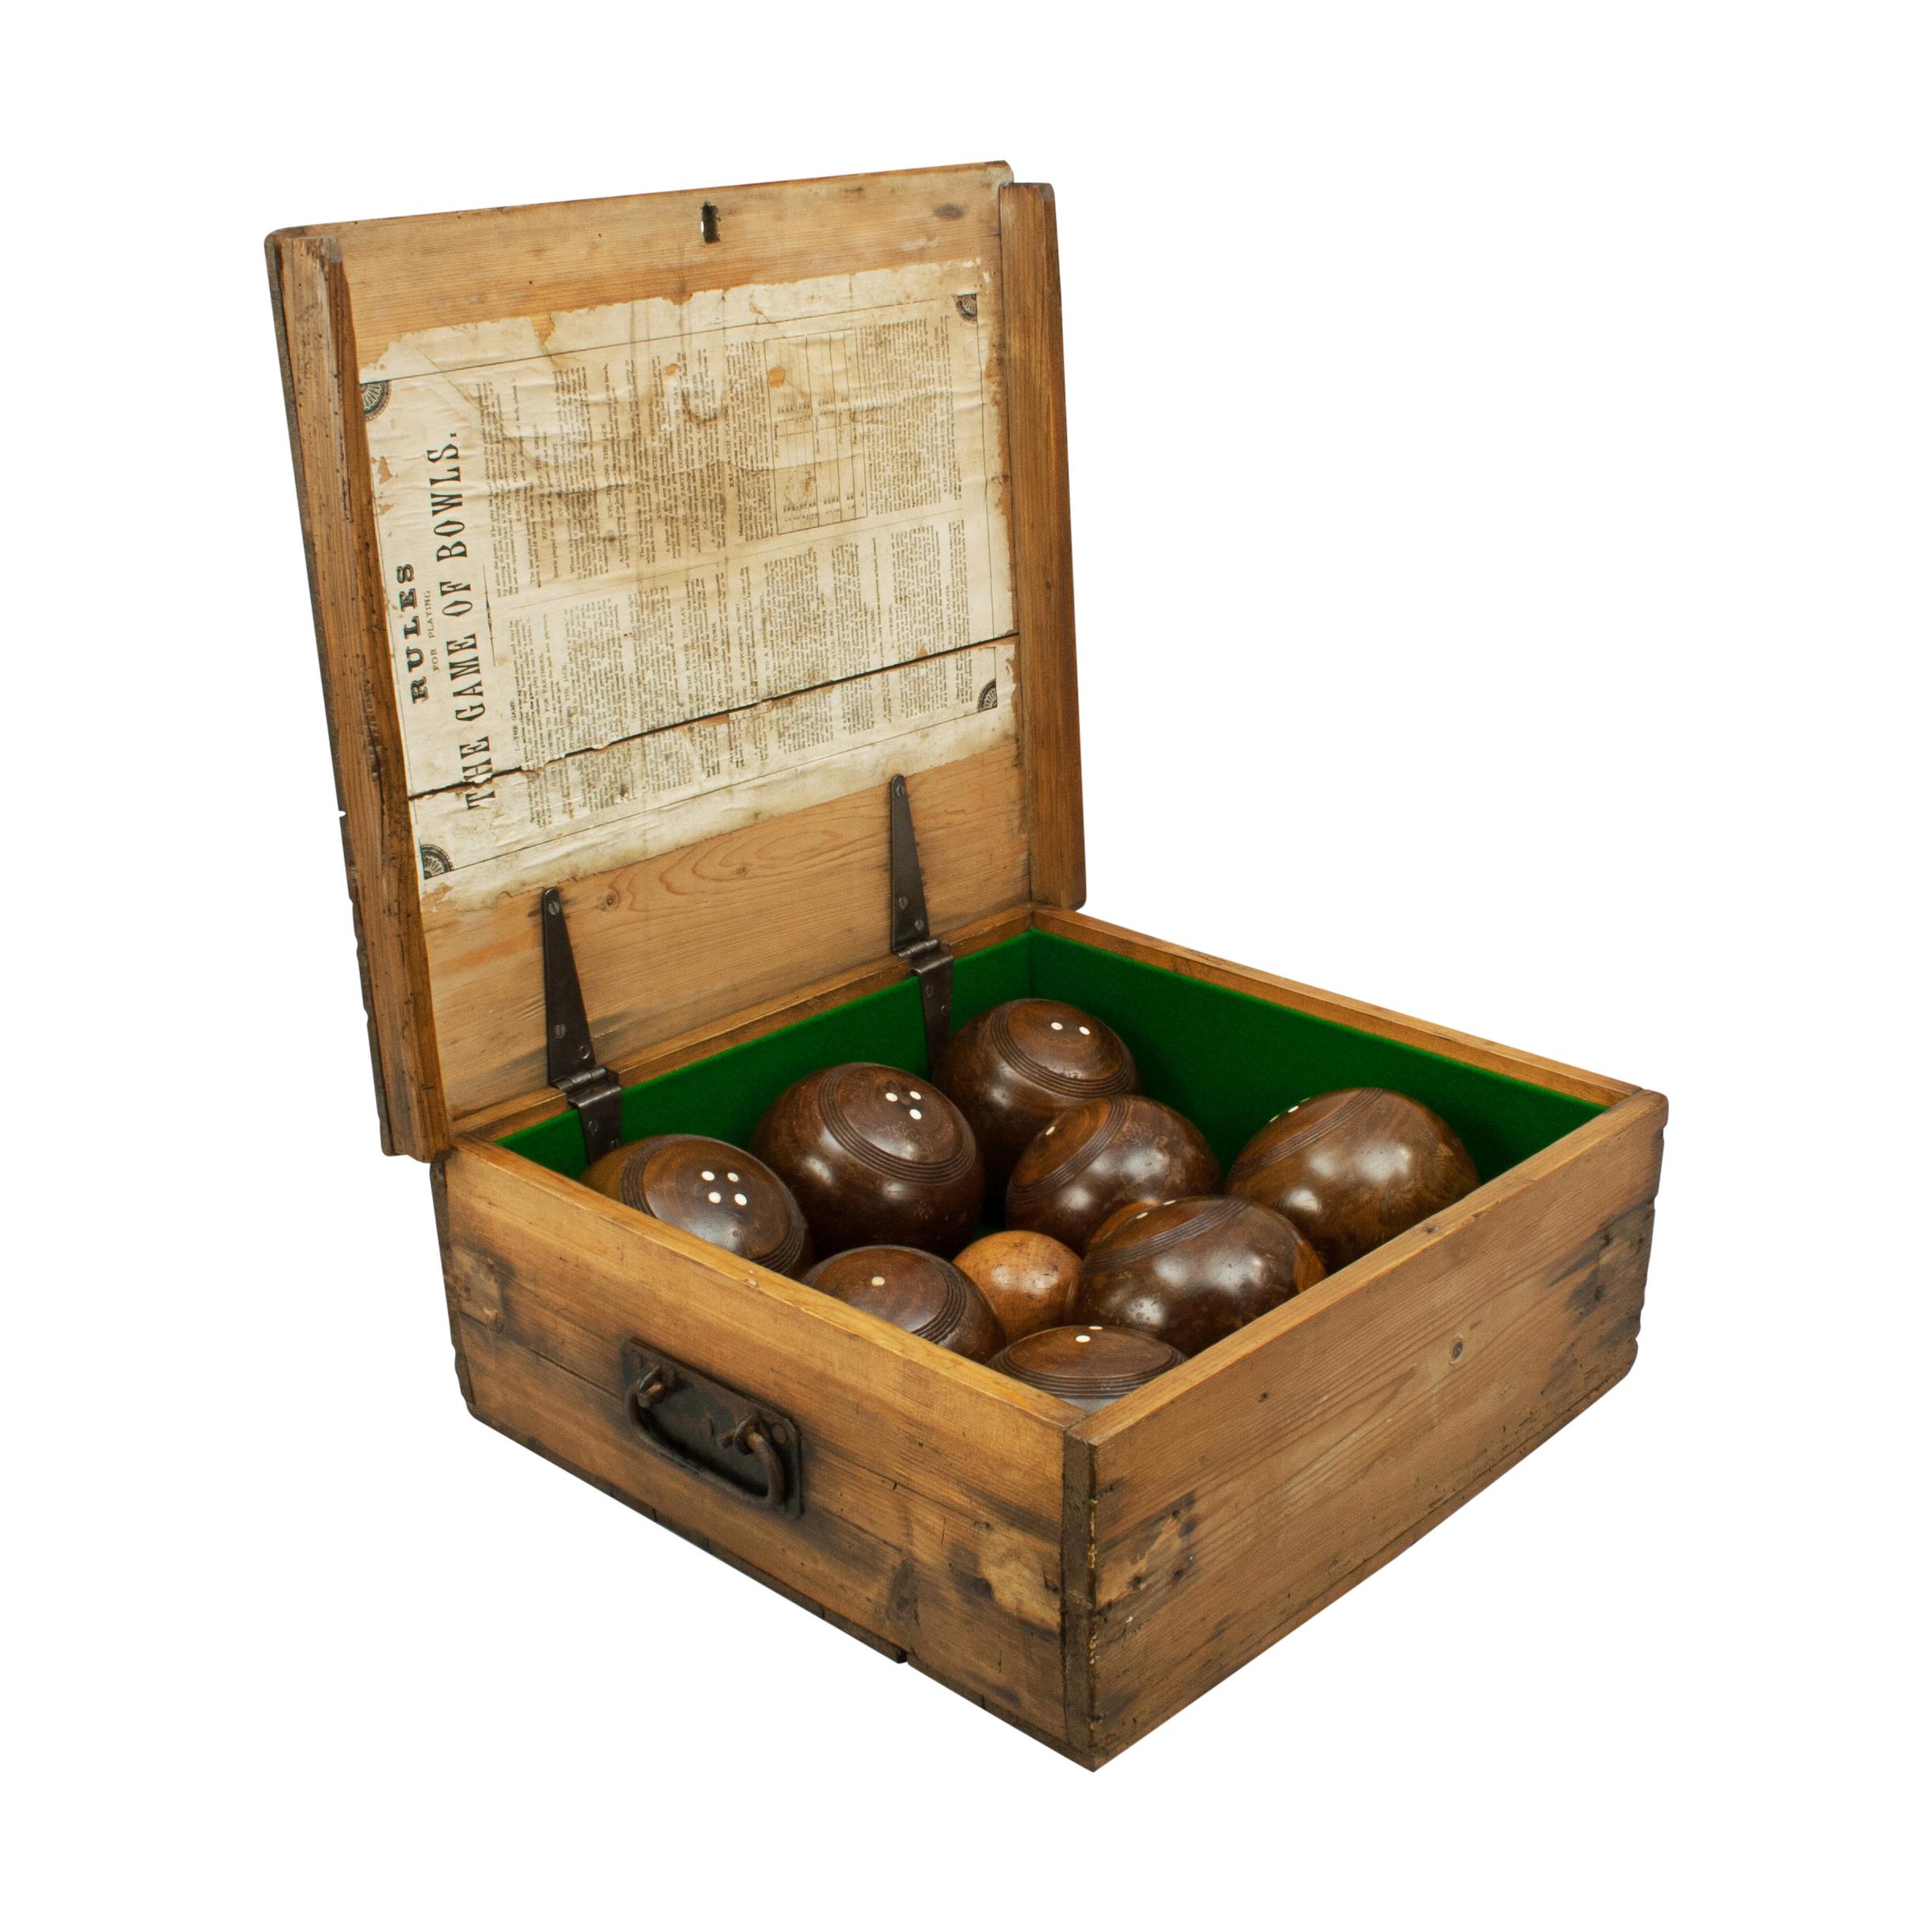 Boxed Lignum vitae lawn bowls.
A good set of 8 lignum vitae lawn bowls in original polished pine box in good condition with a baized interior bottom. The set comes with a lignum-vitae jack (8 cm diameter) and four pairs of bowls, the pairs